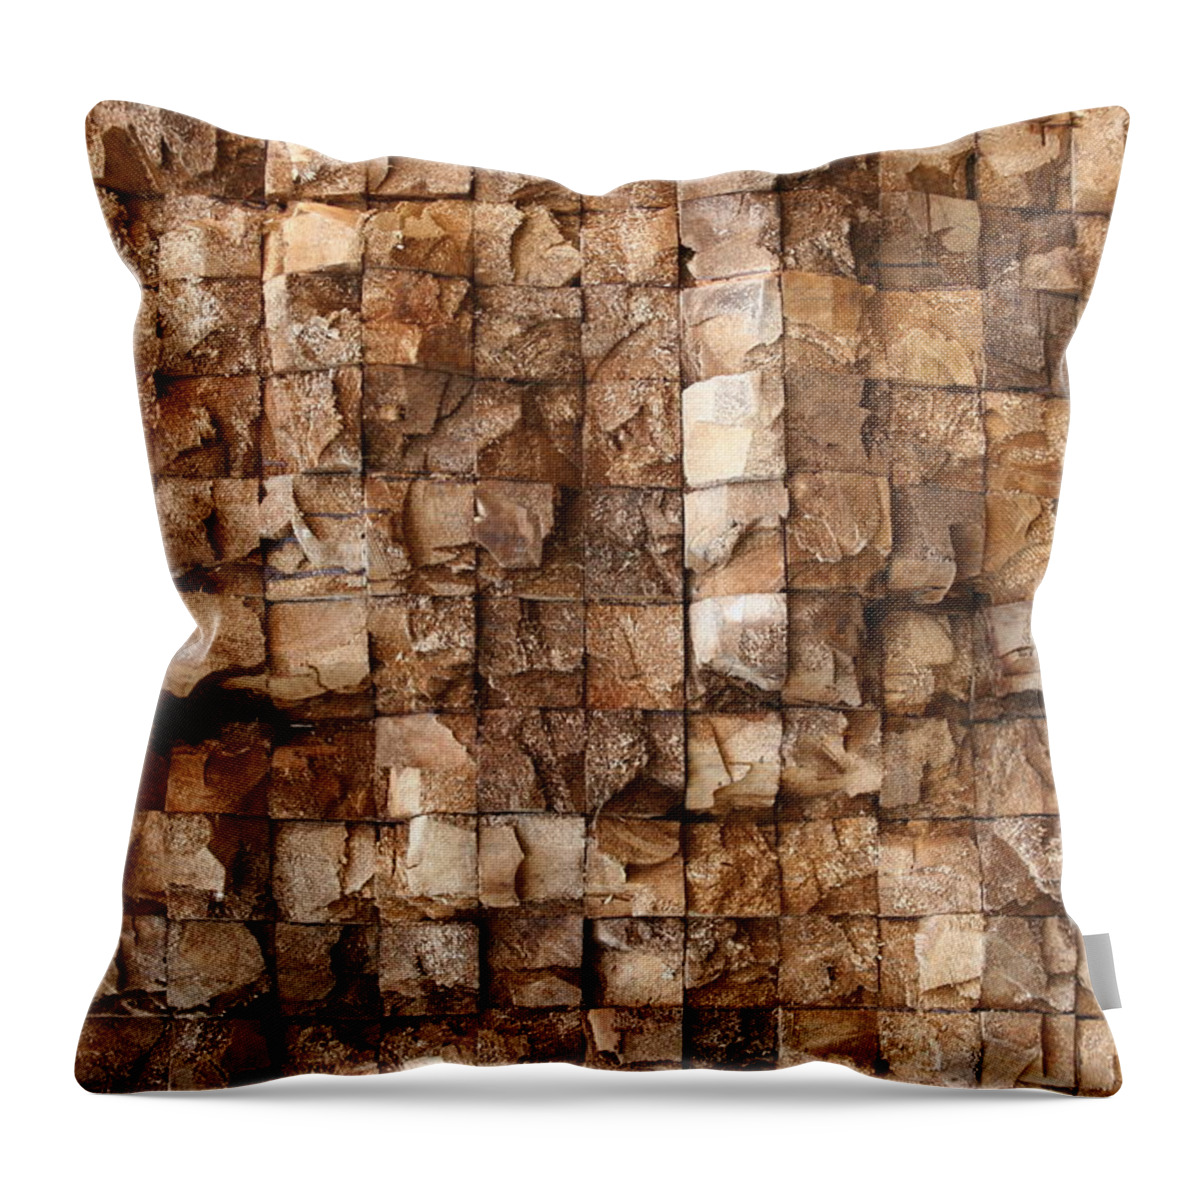 Texture Throw Pillow featuring the photograph End grain 132 by Michael Fryd